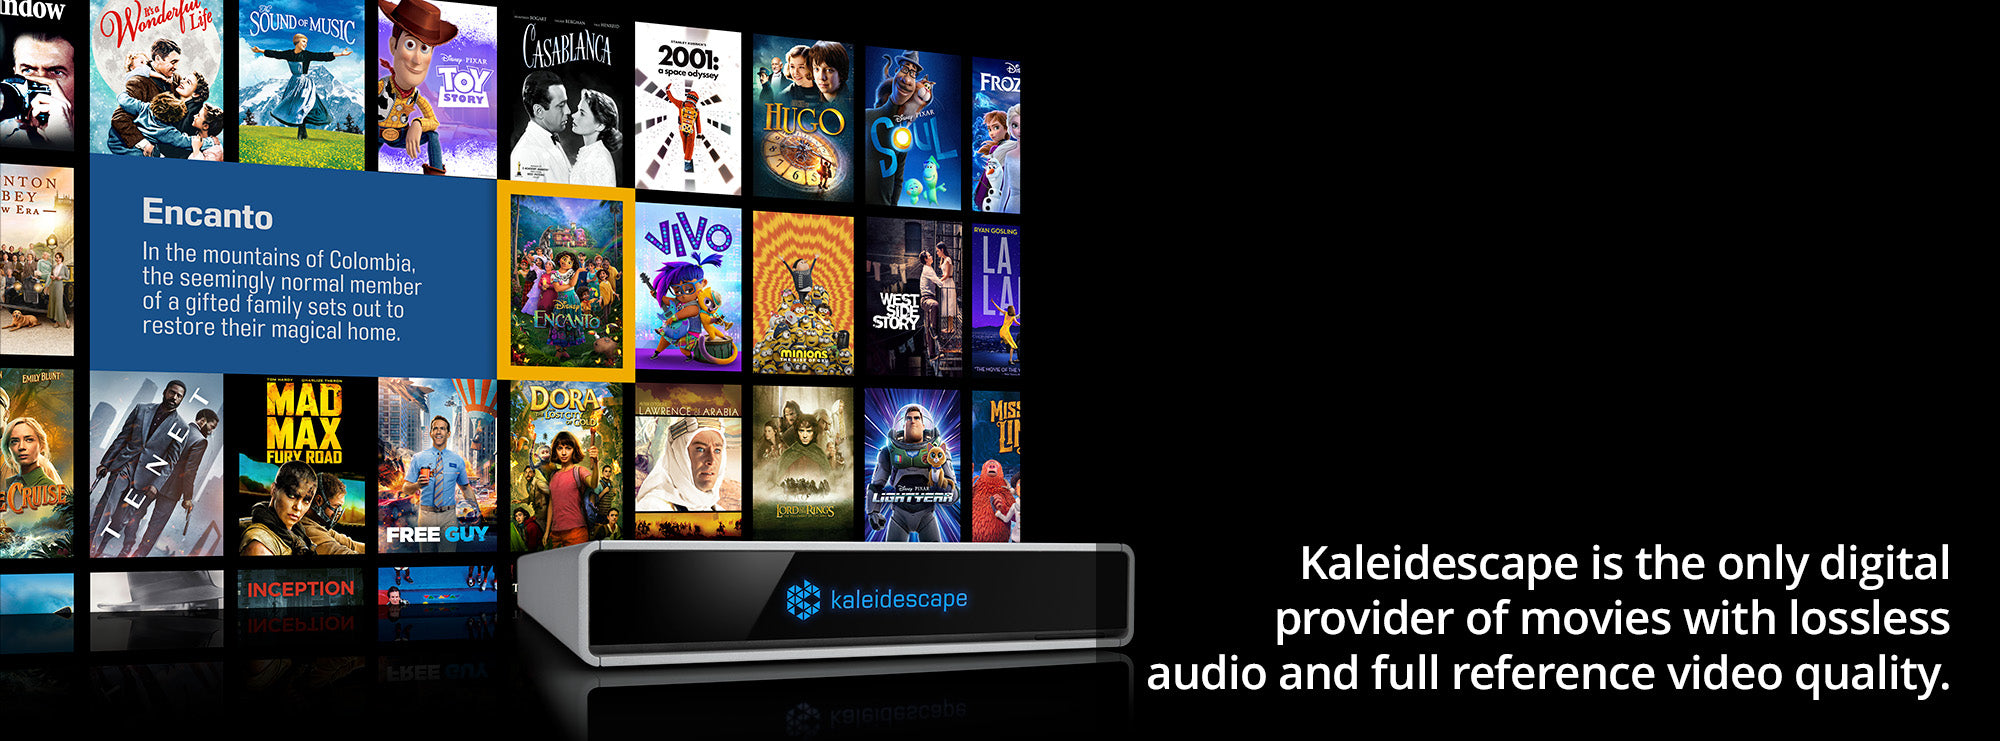 Kaleidescape is the only digital provider of movies with losslessaudio and full reference video quality.